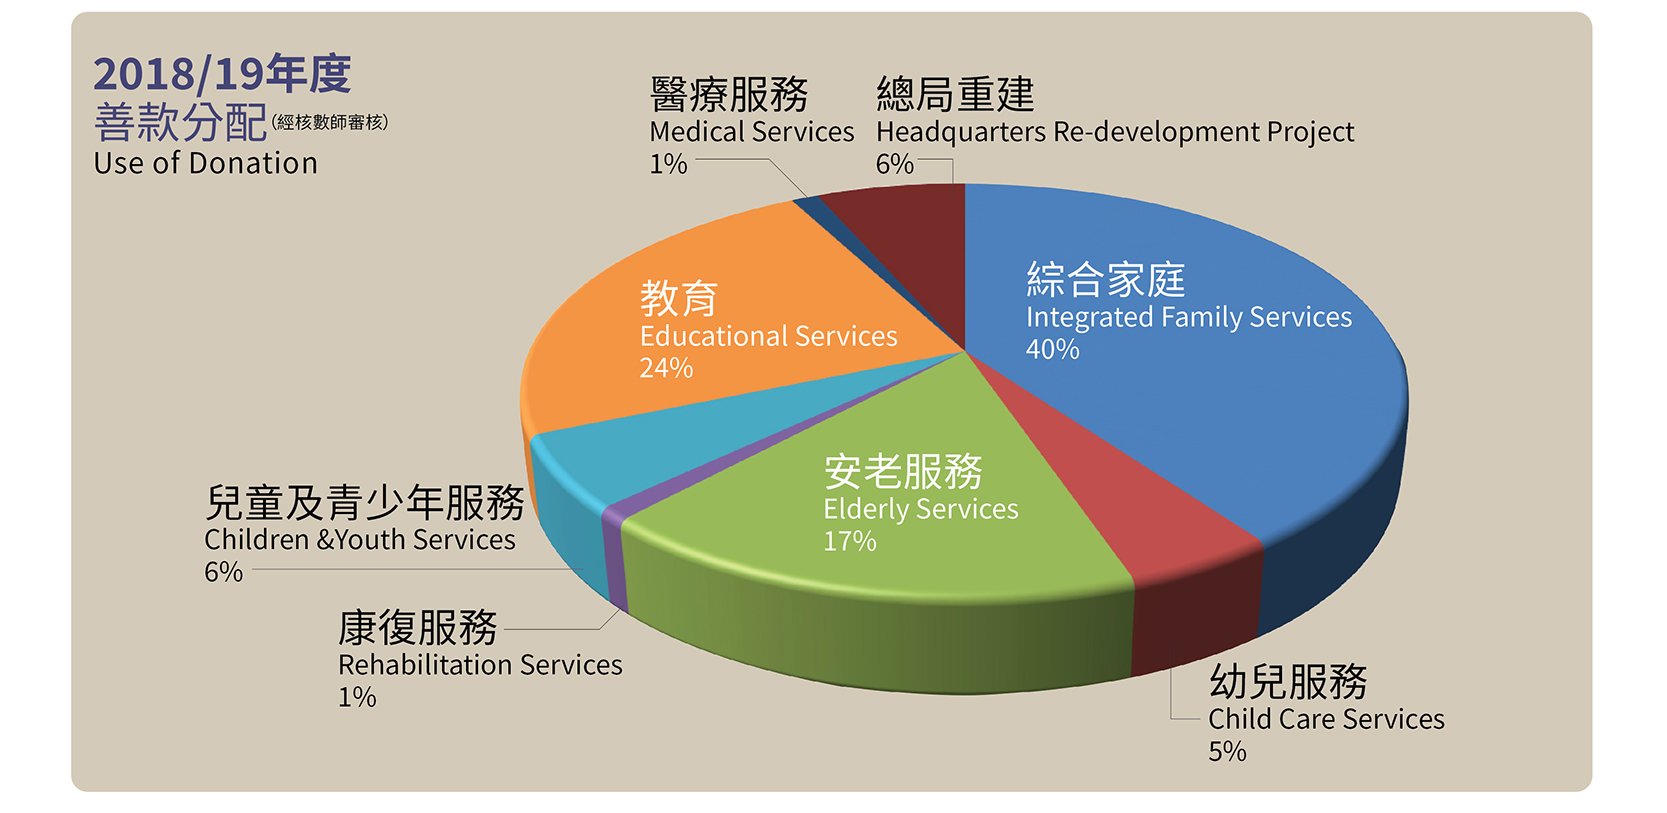 Breakdown of donations allocated to services